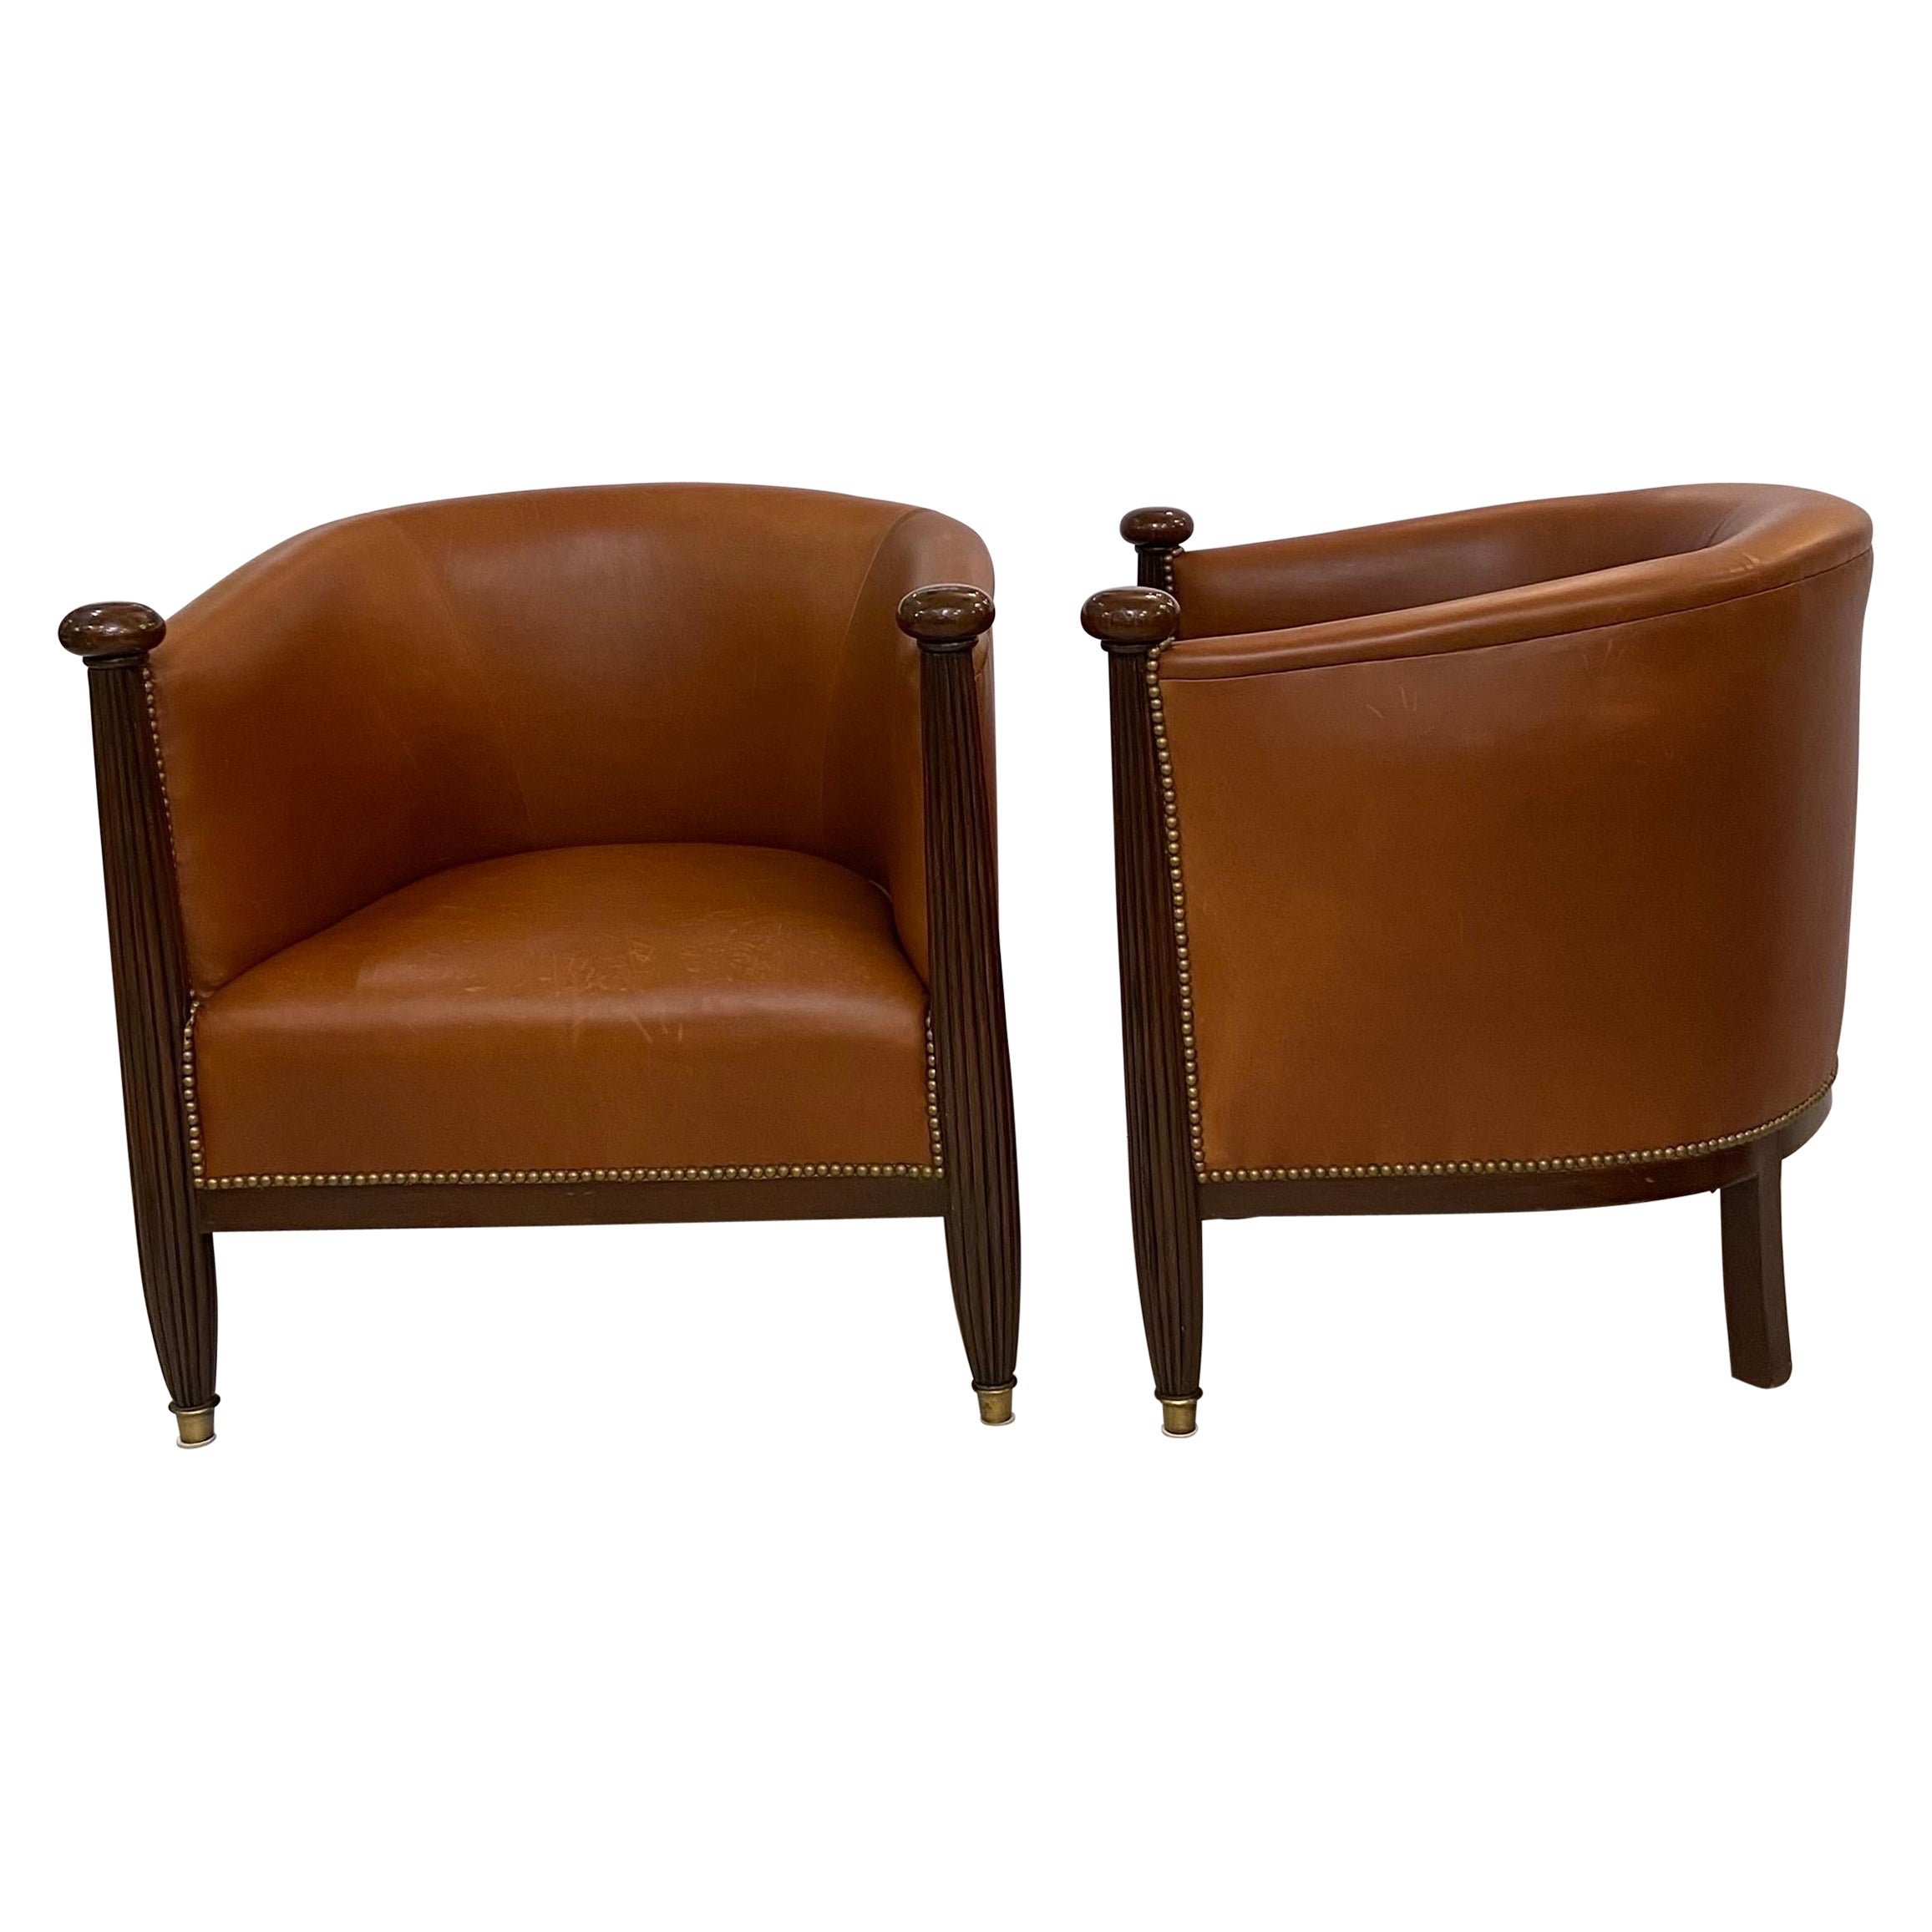 Pair of French Art Deco Mahogany Barrel Chairs Upholstered in Fine Leather 